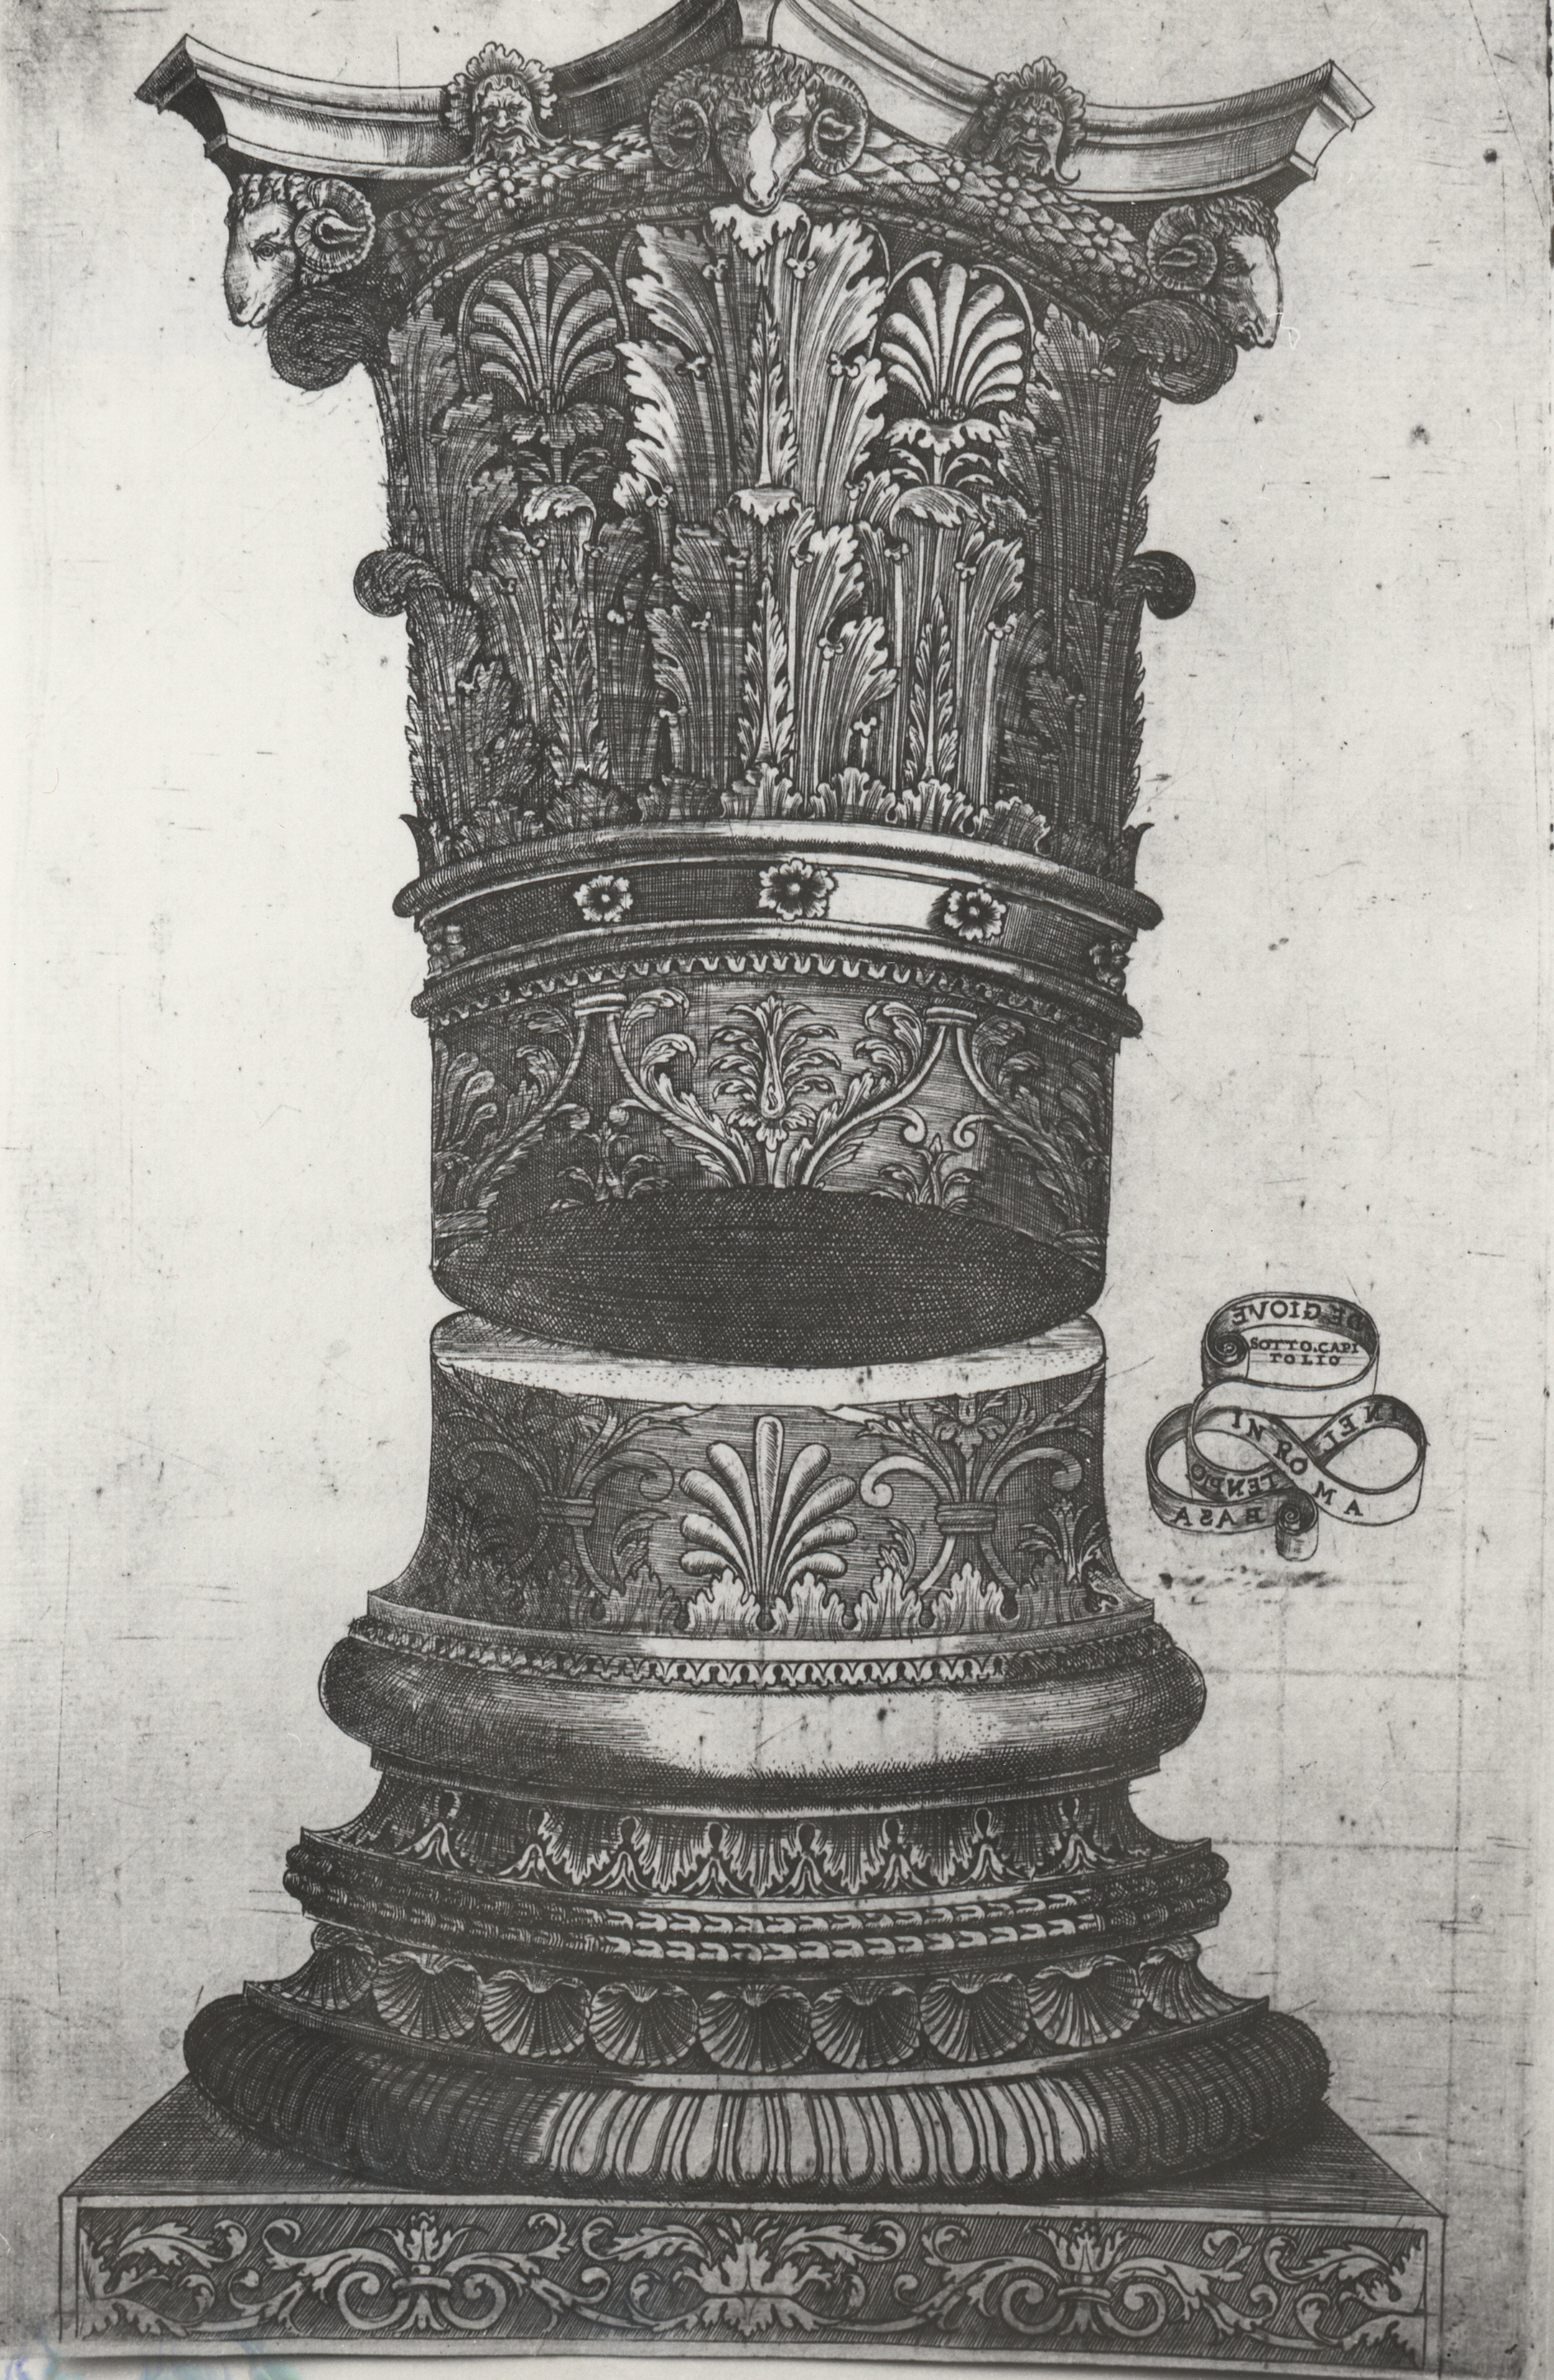 Old prints of a column from the Renaissance